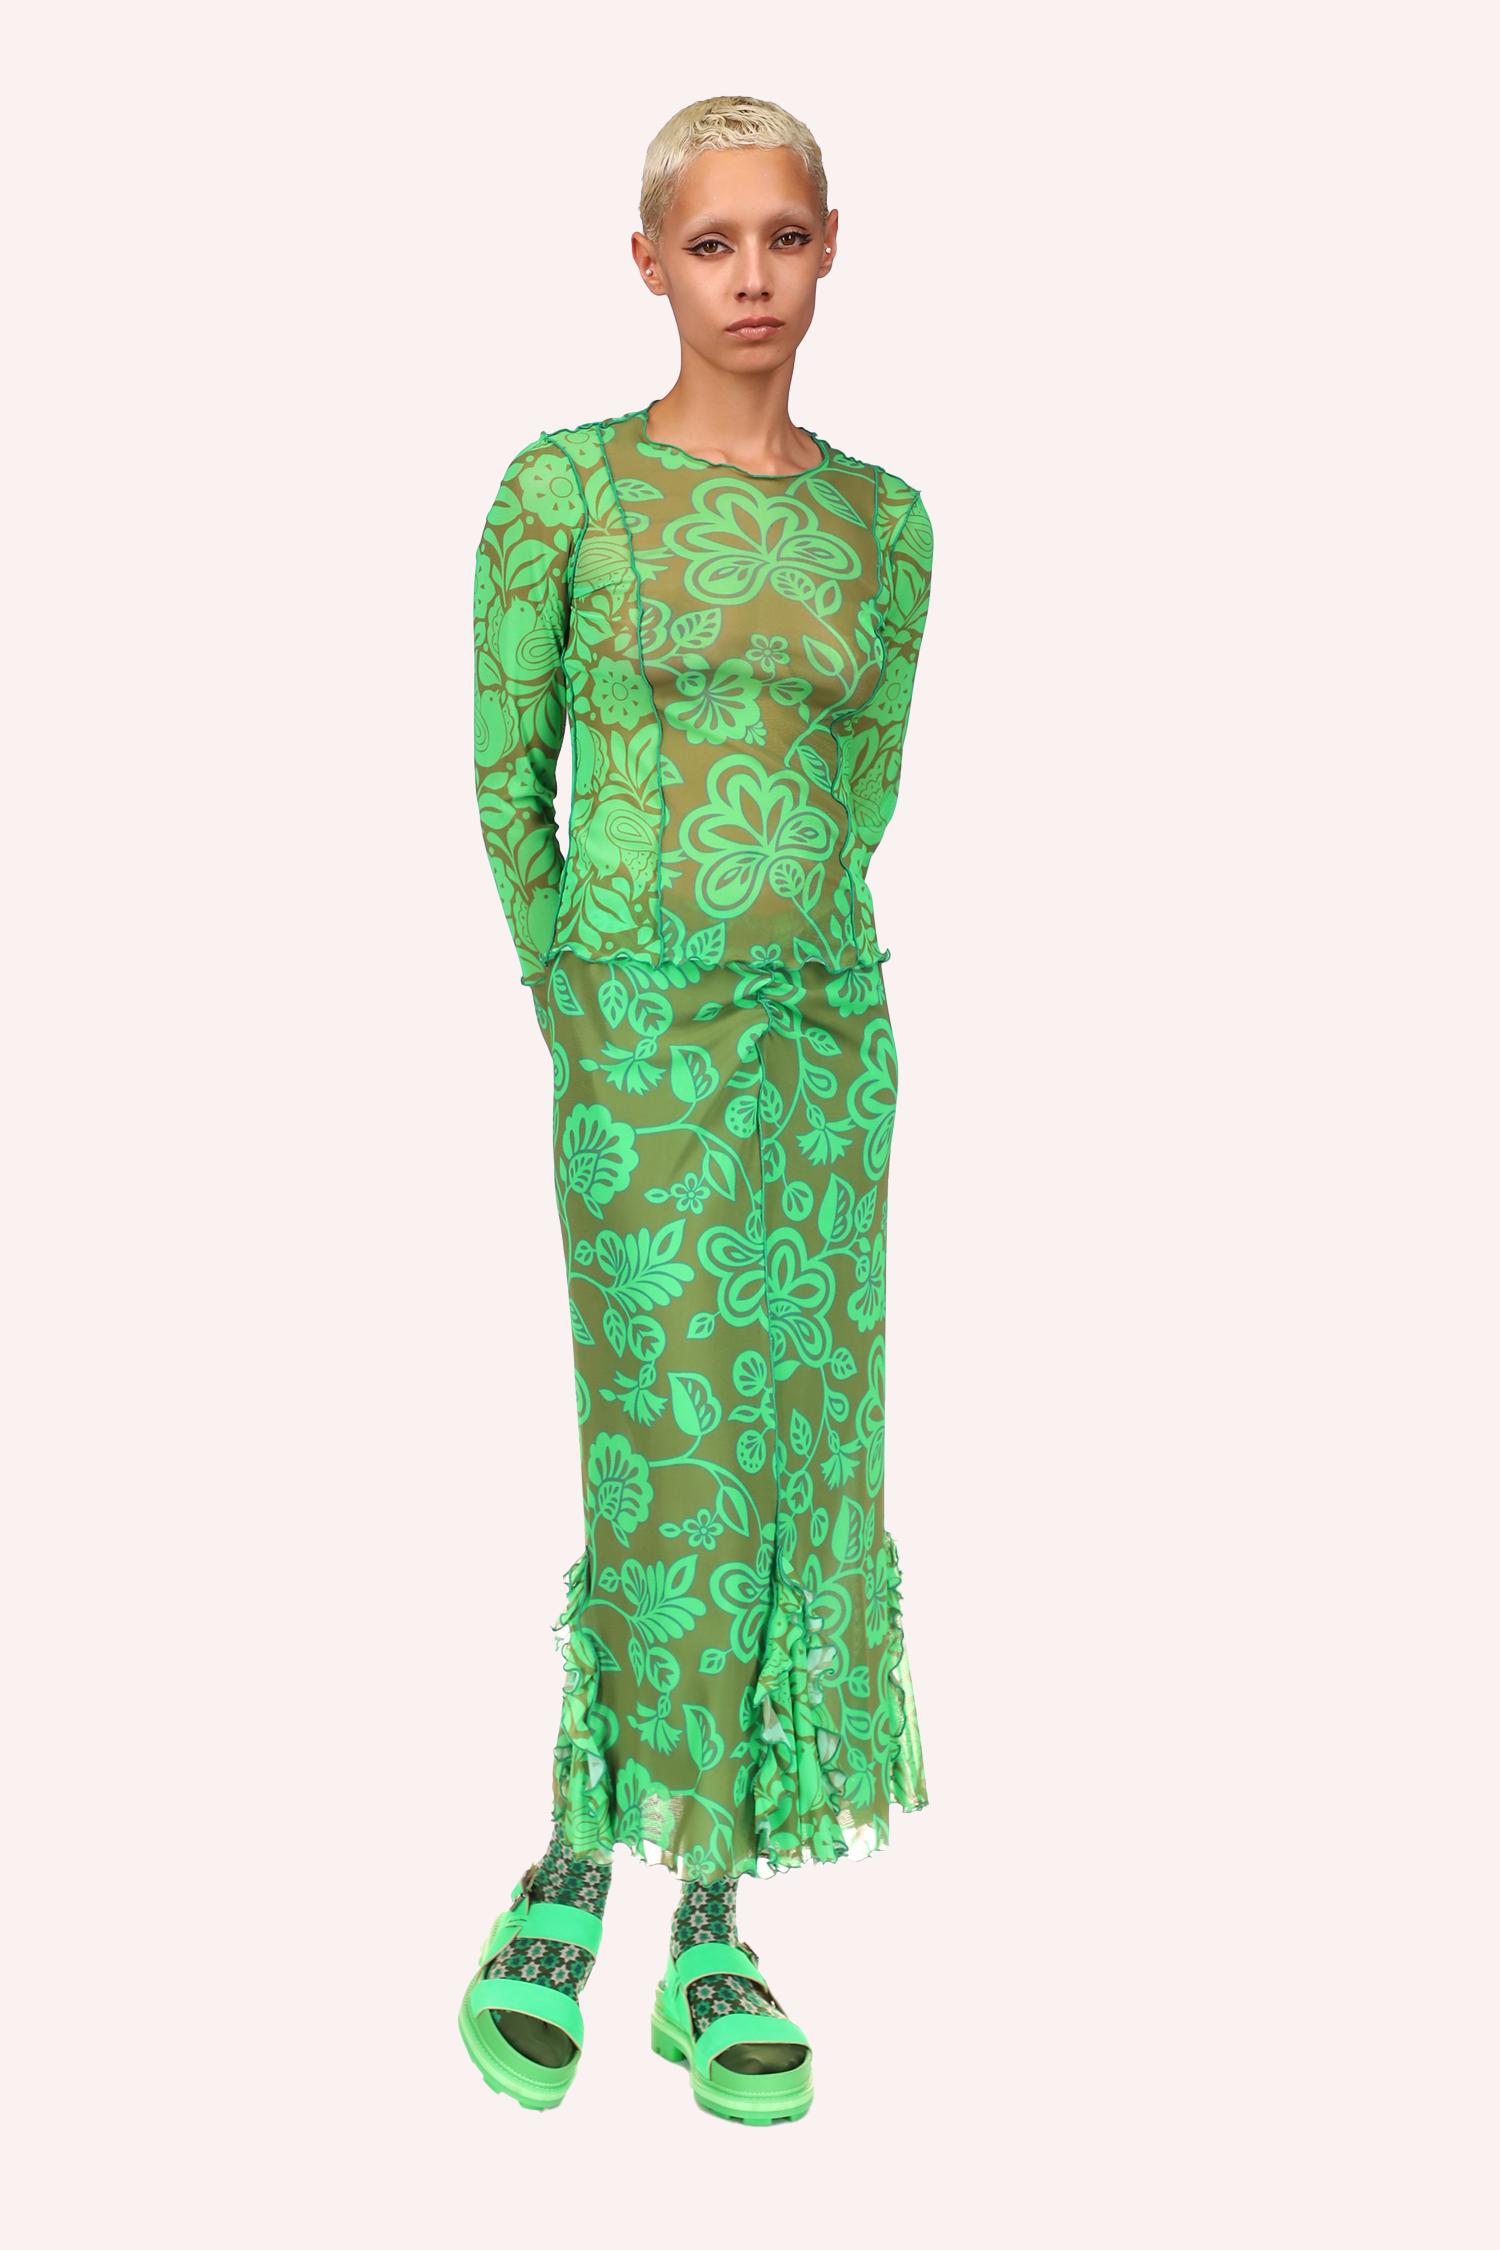 Mesh Skirt Glo Green, with large green flowers on the mesh, the long green stiches in front, green ruffle at bottom